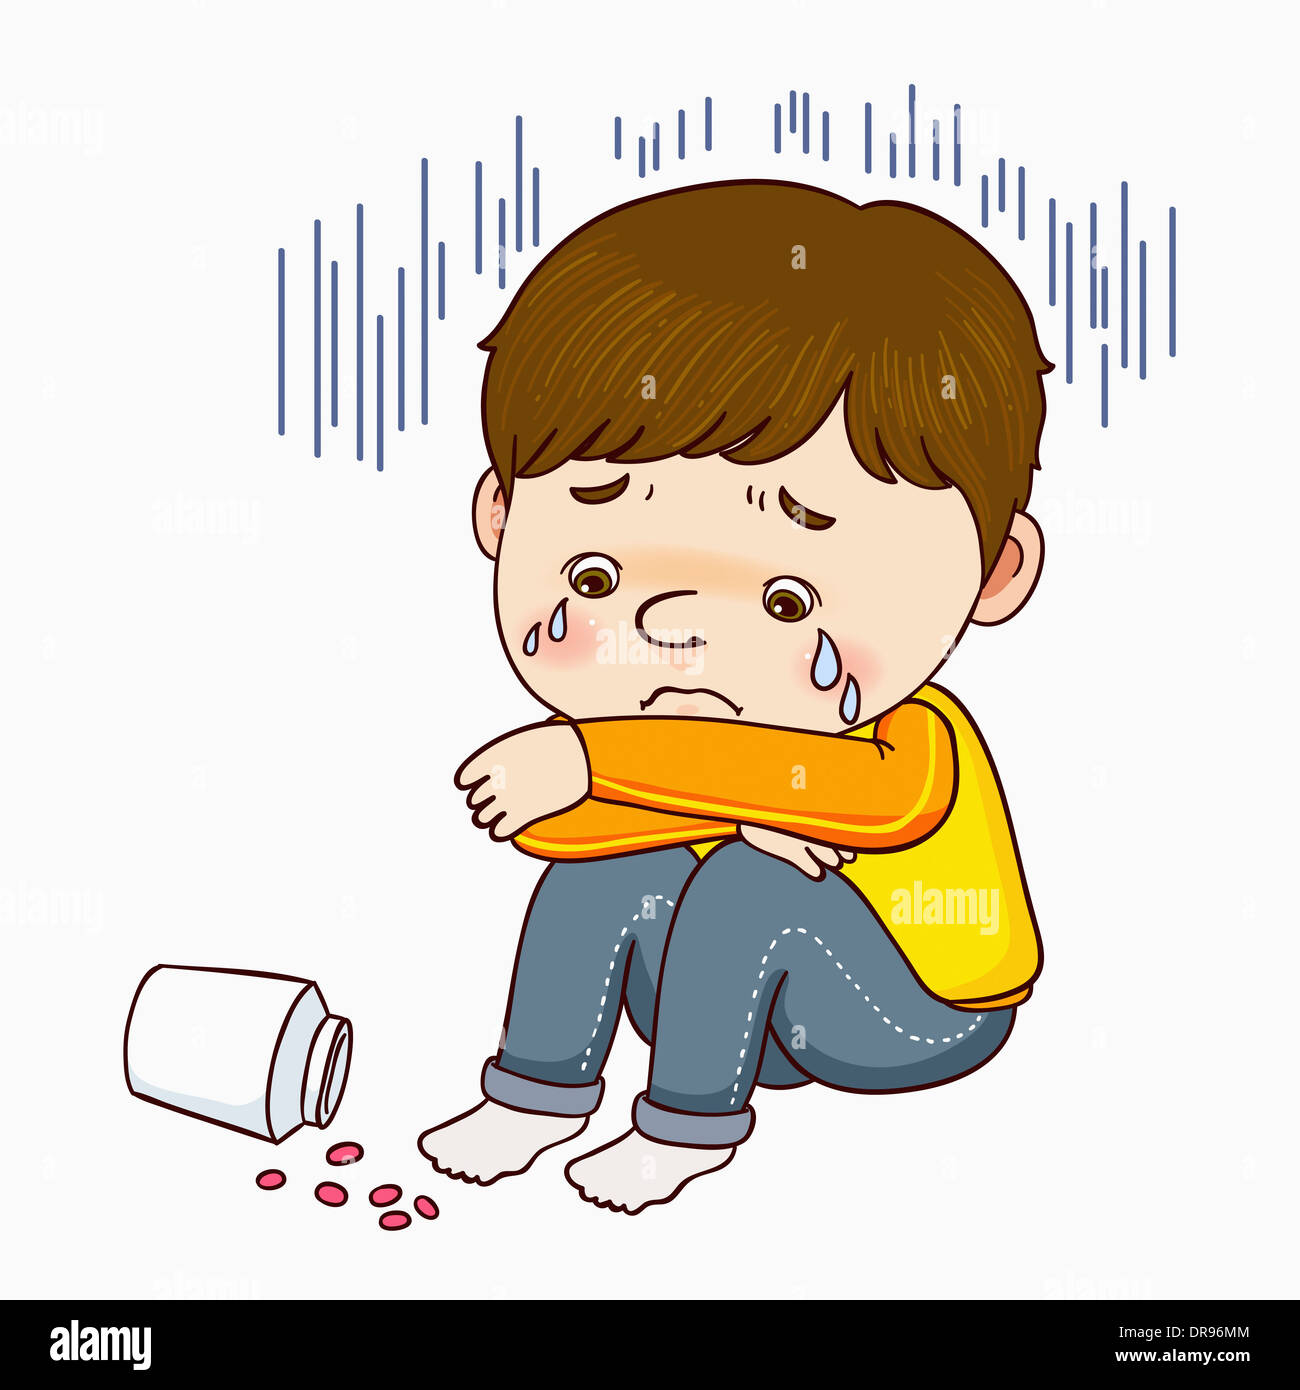 illustration of a boy who is depressed Stock Photo